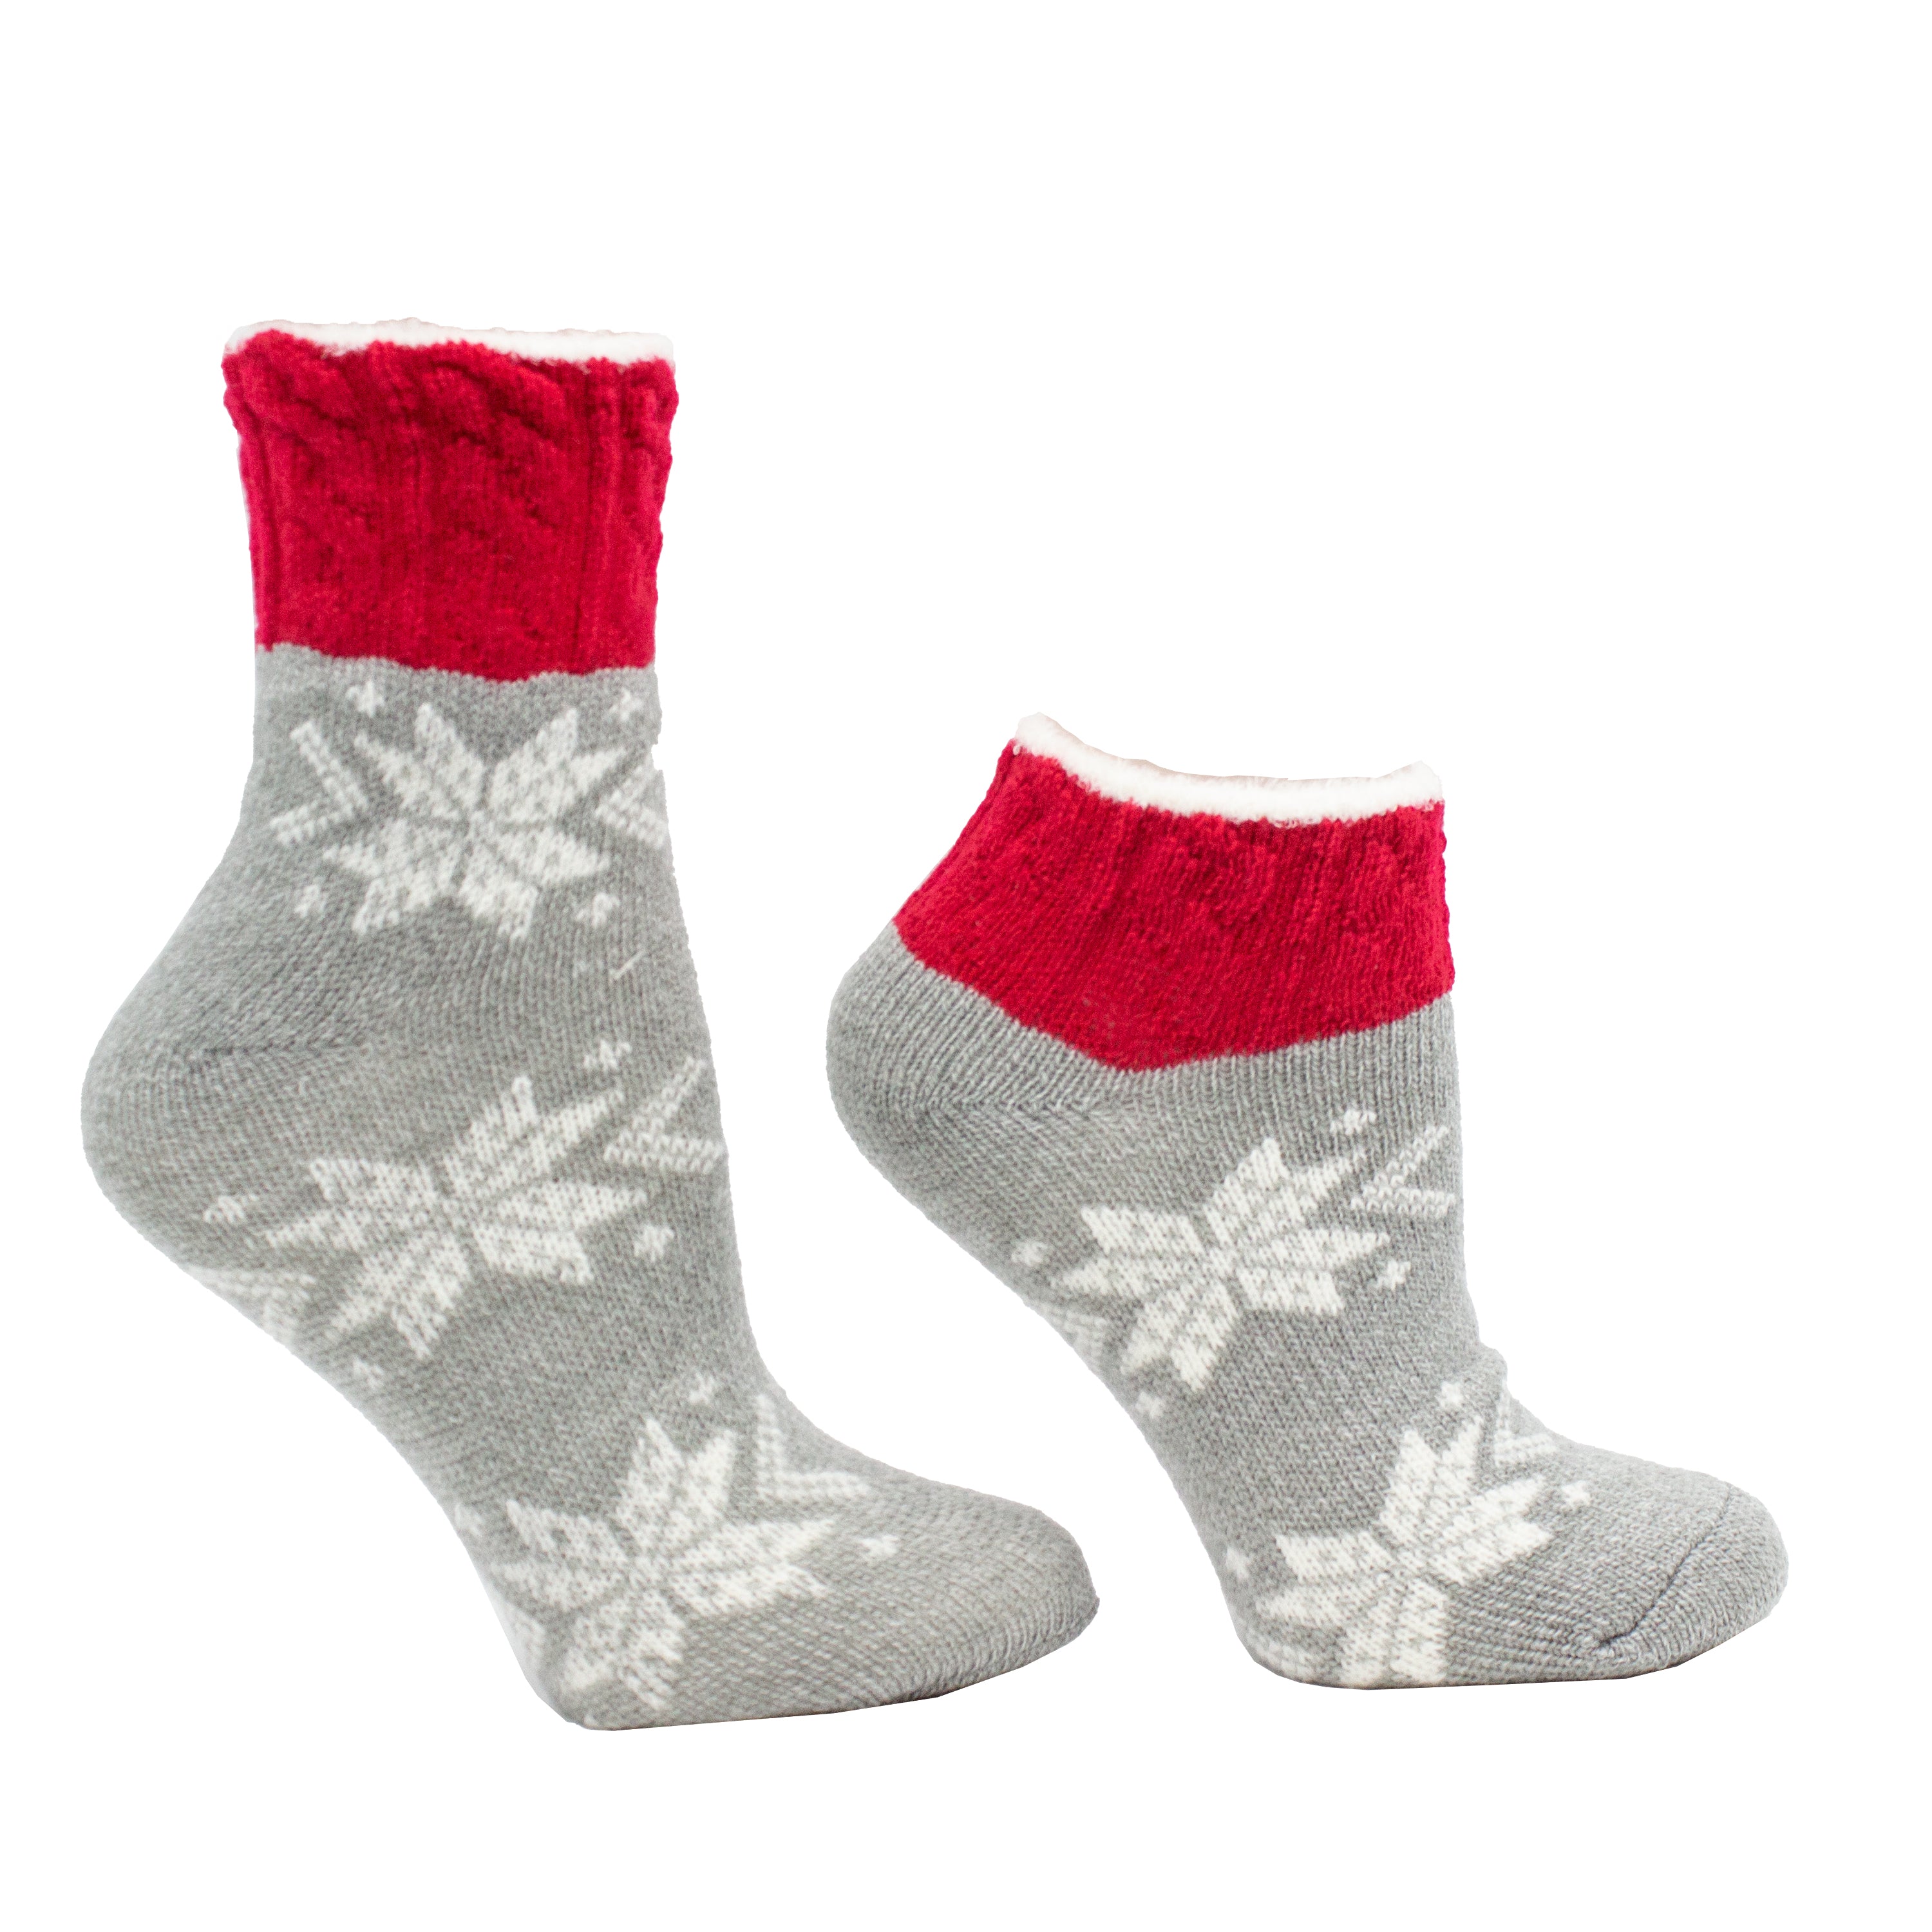 Blizzard Blues - 2 pack o of double layer socks Rose N Shea butter infused